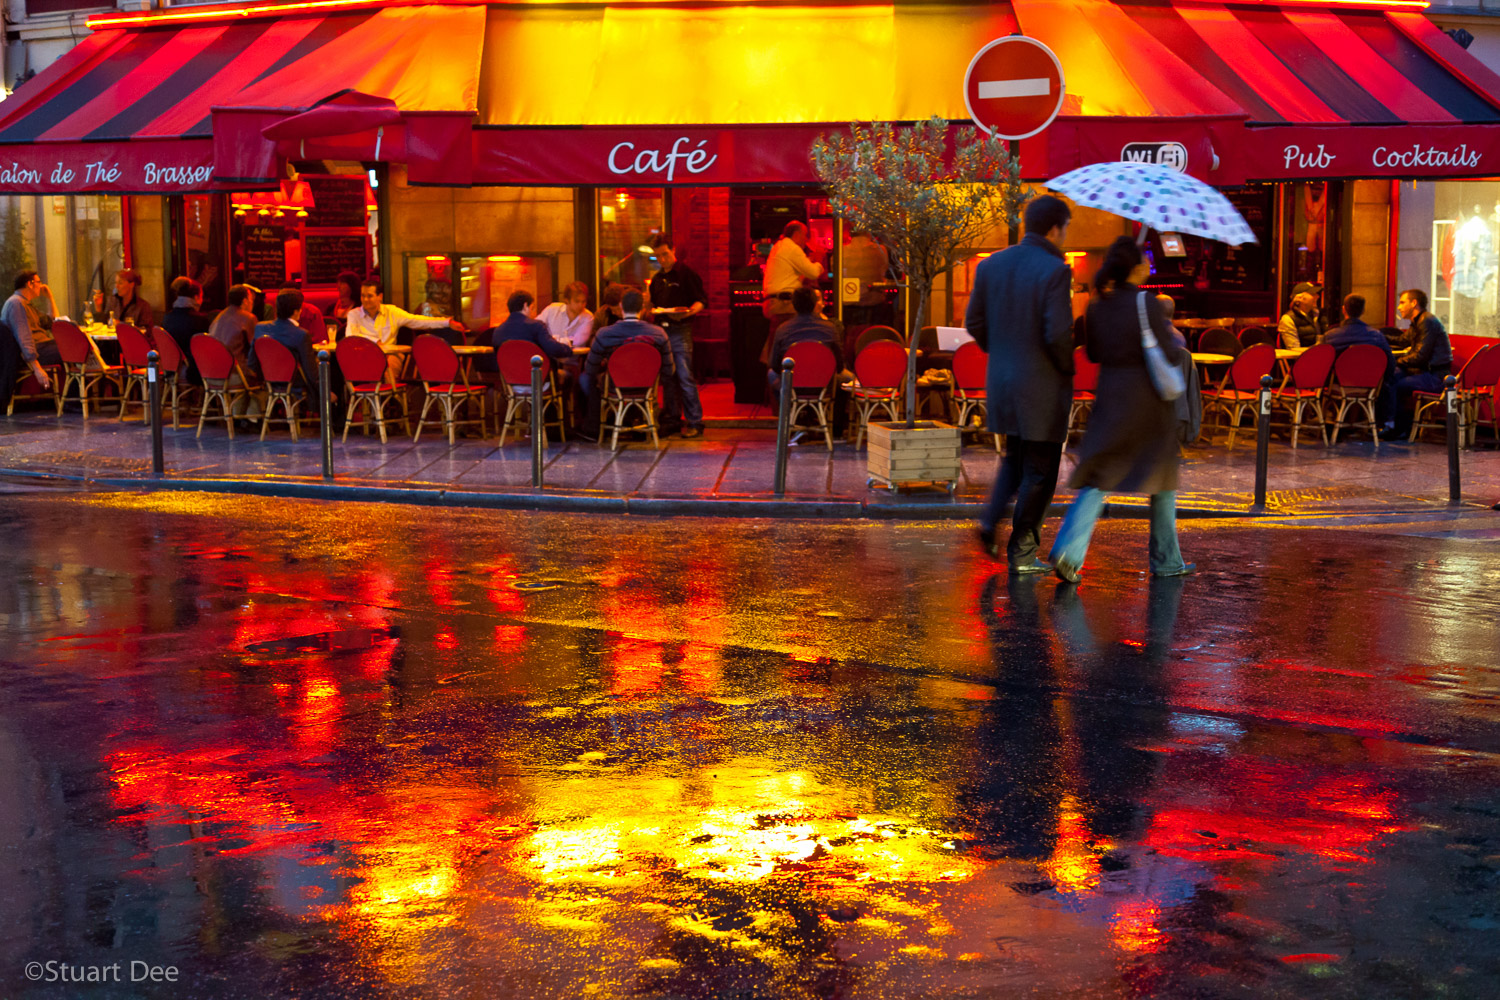  Cafe scene with wet streets an night, Paris, France 